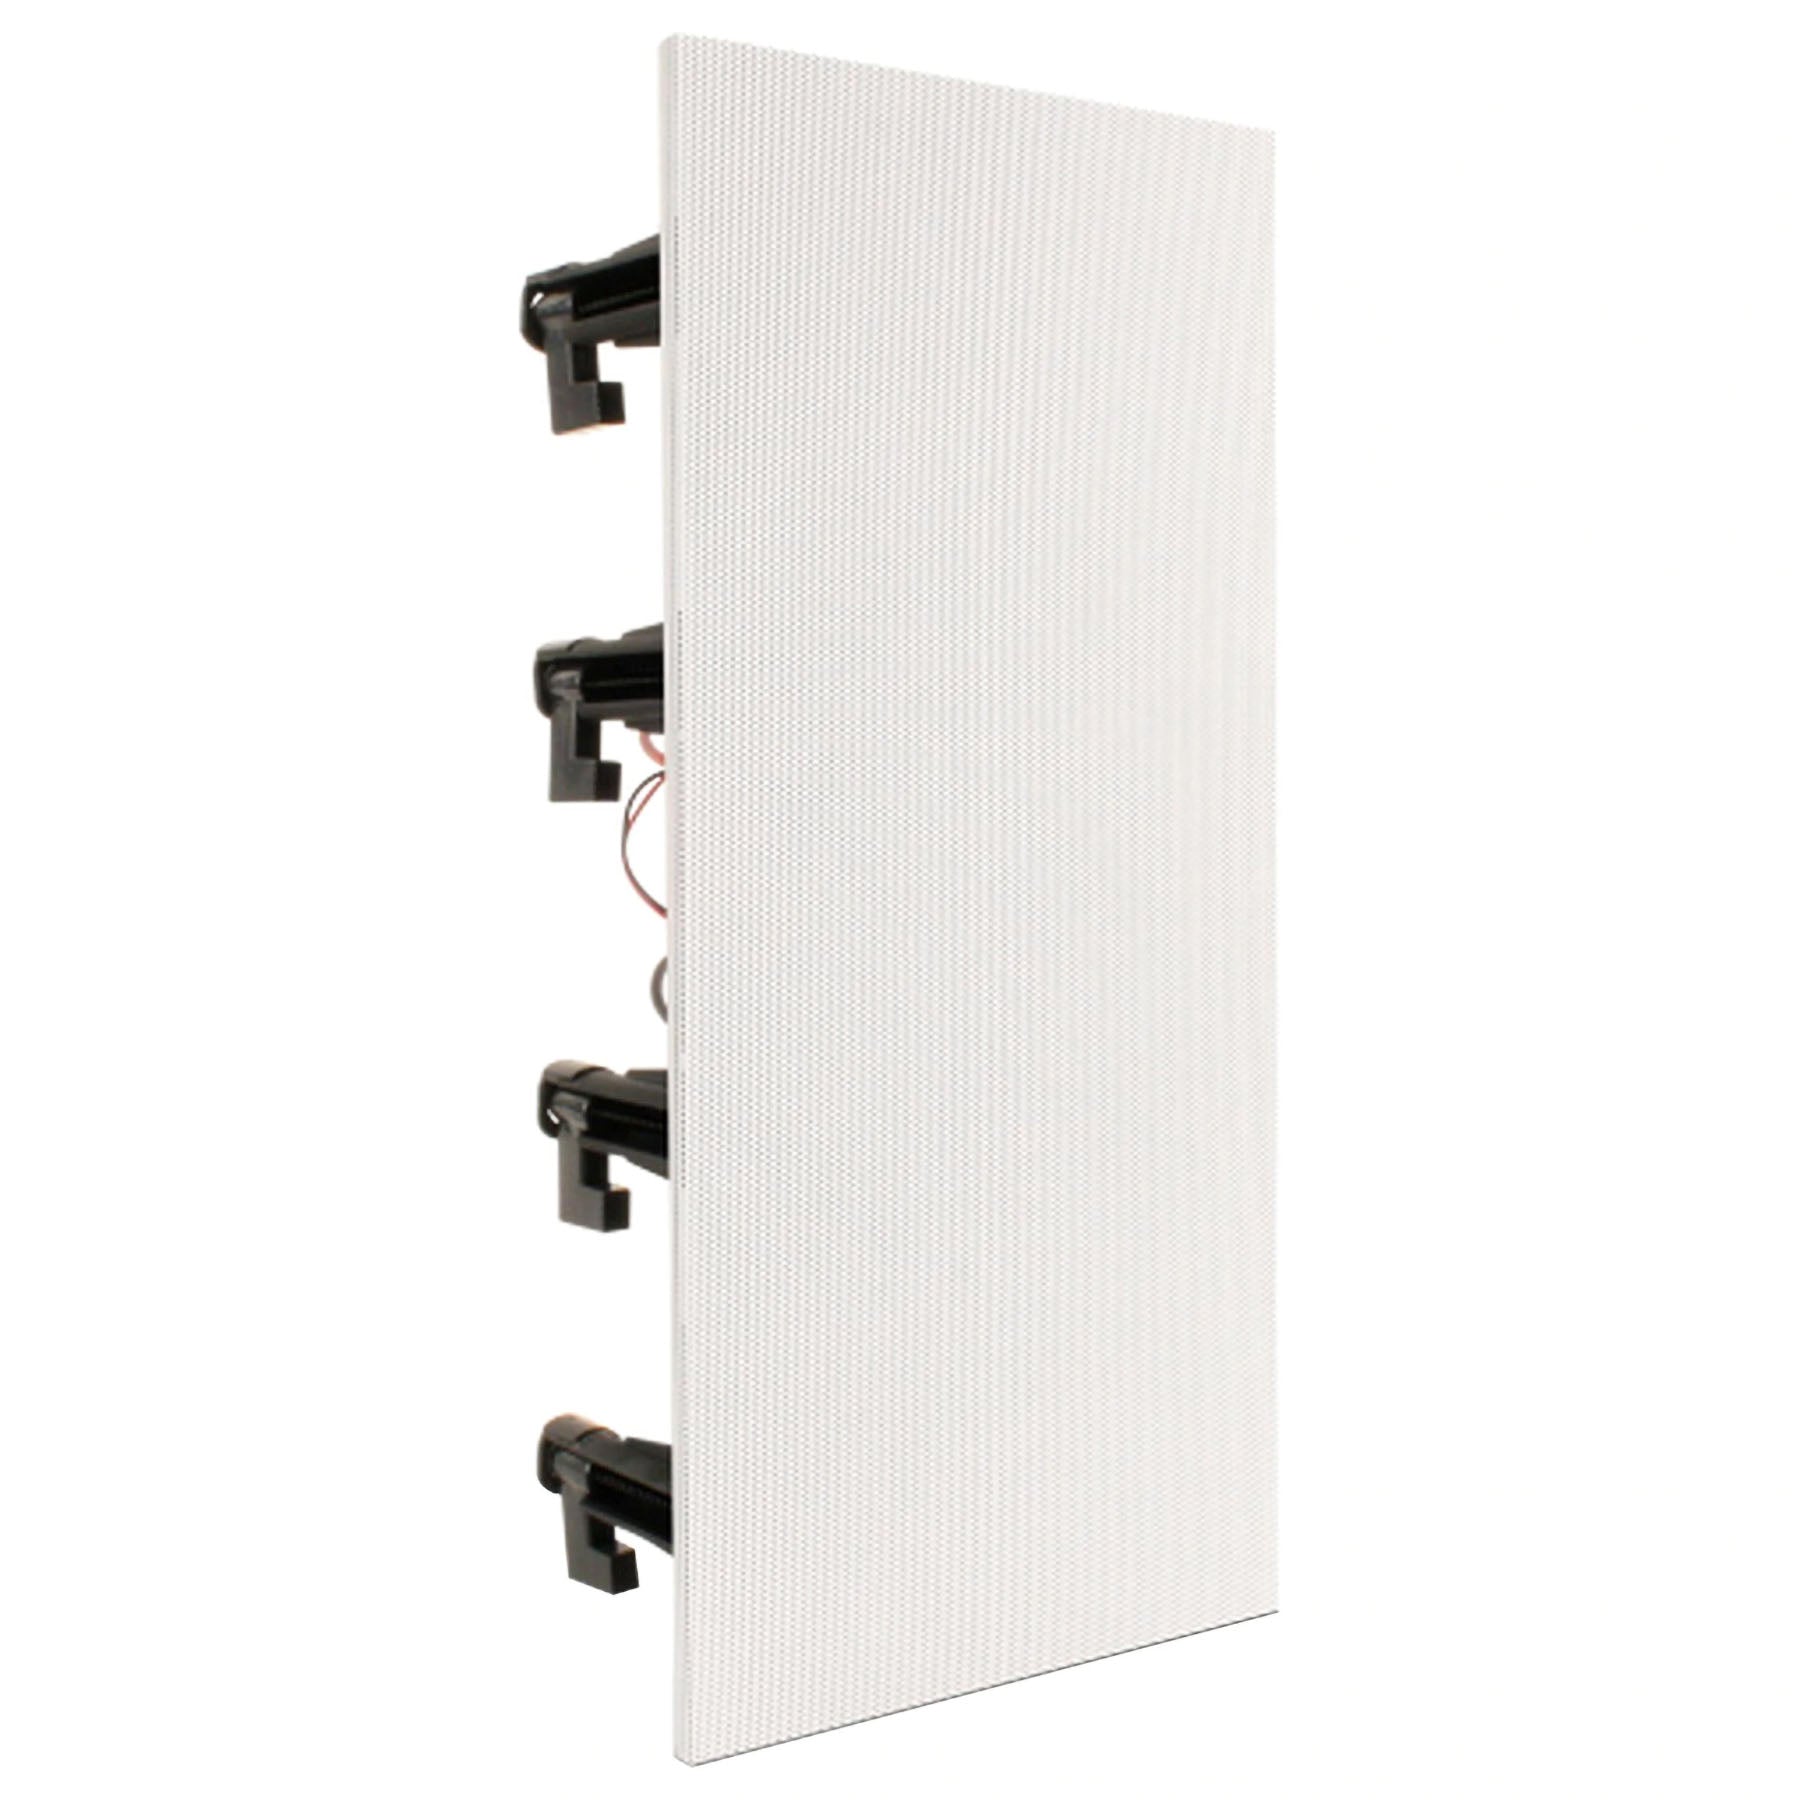 Revel FBB55 Fire Rated Back Box for all WX53 Models